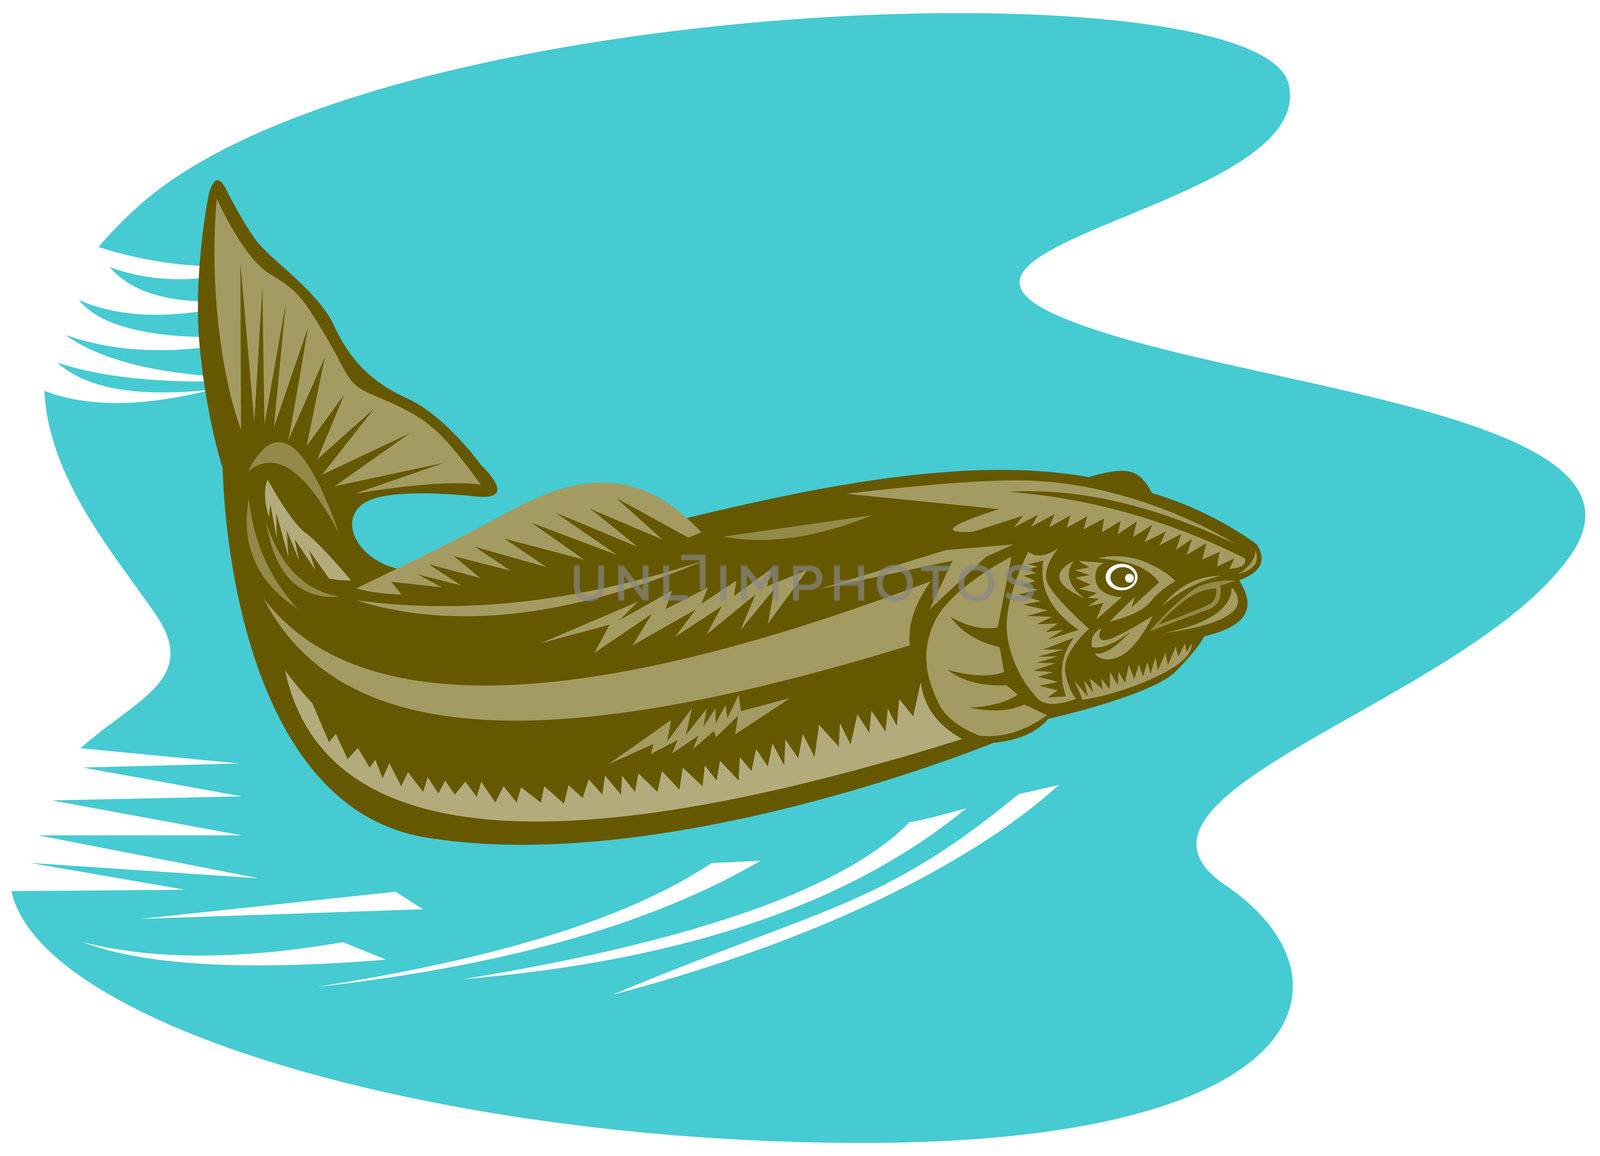 illustration of a trout fish jumping done in retro style on isolated background